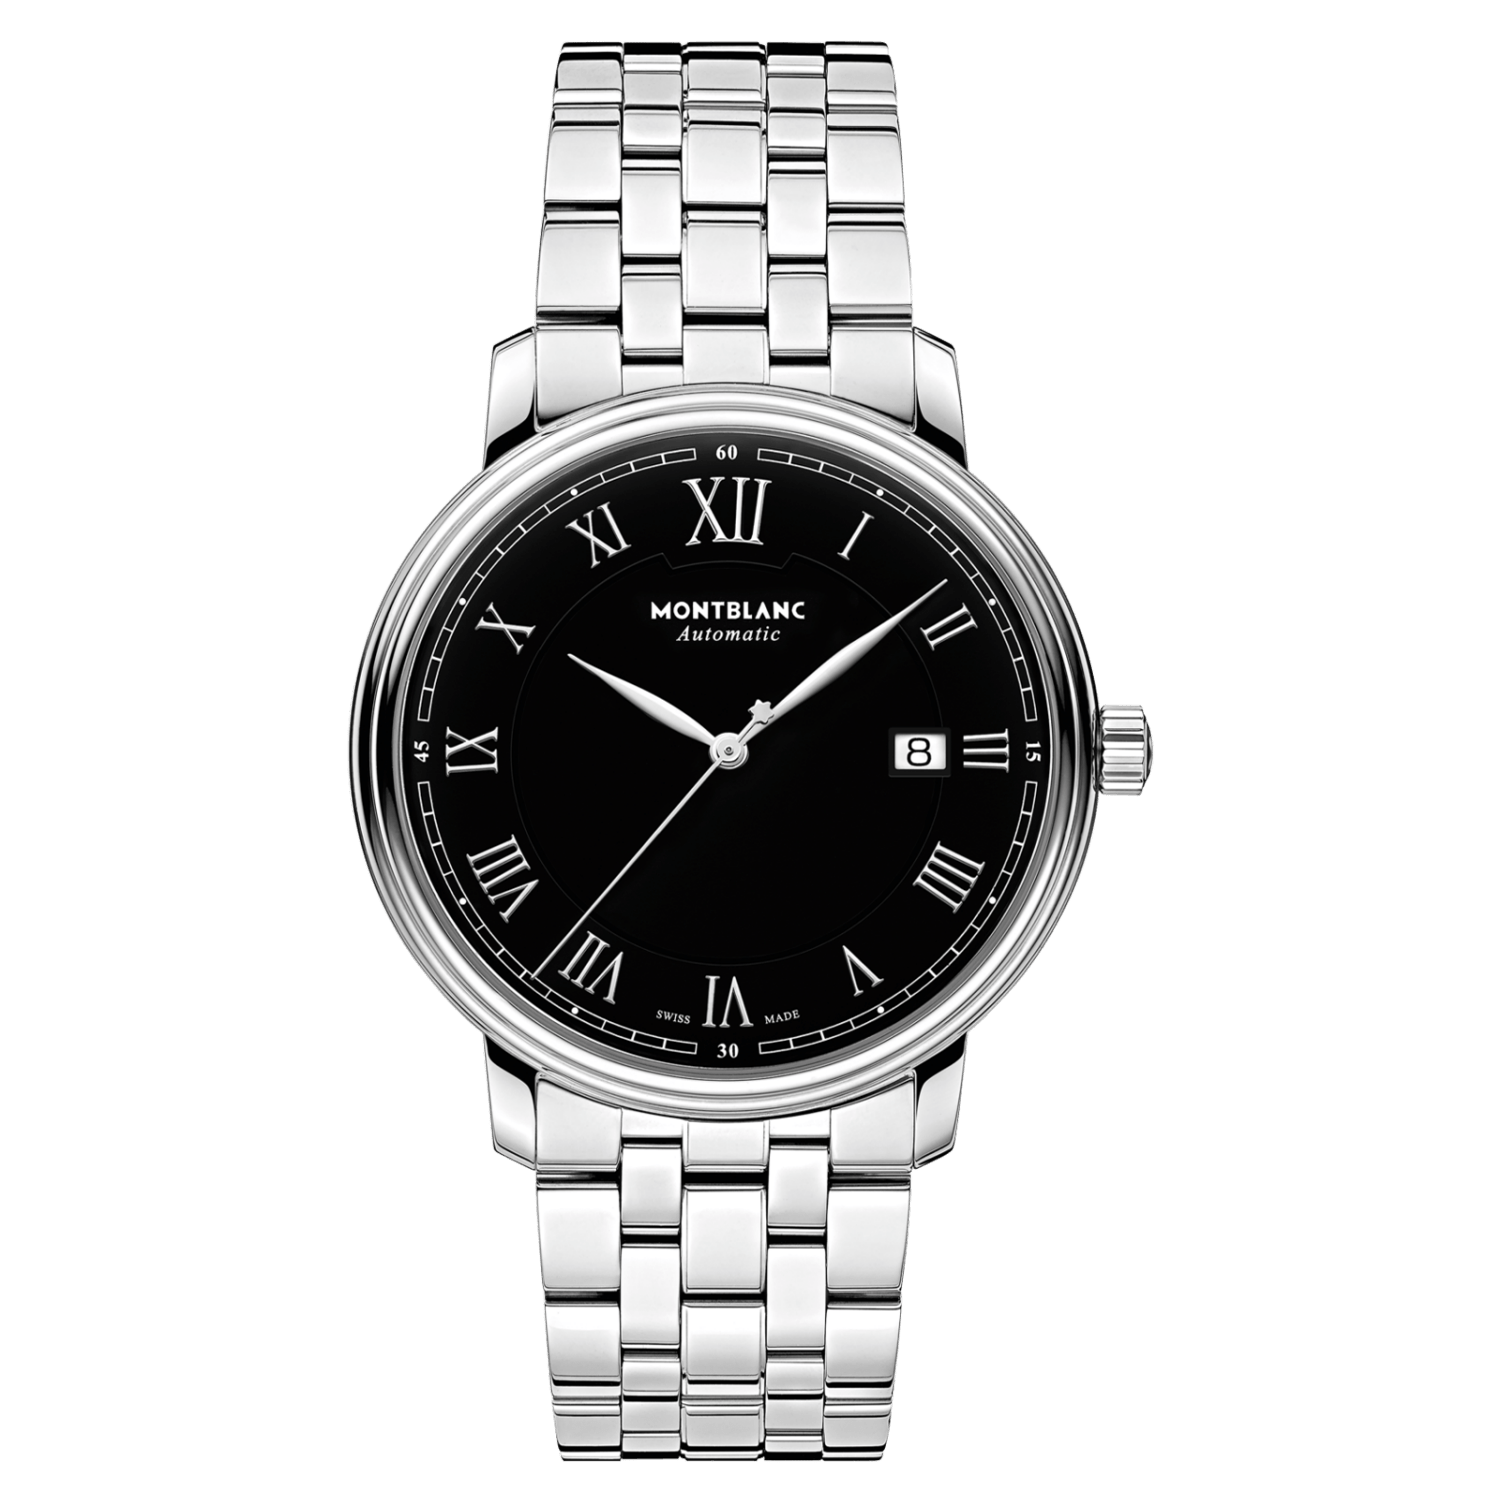 Montblanc Tradition Automatic Men's Watch 116483